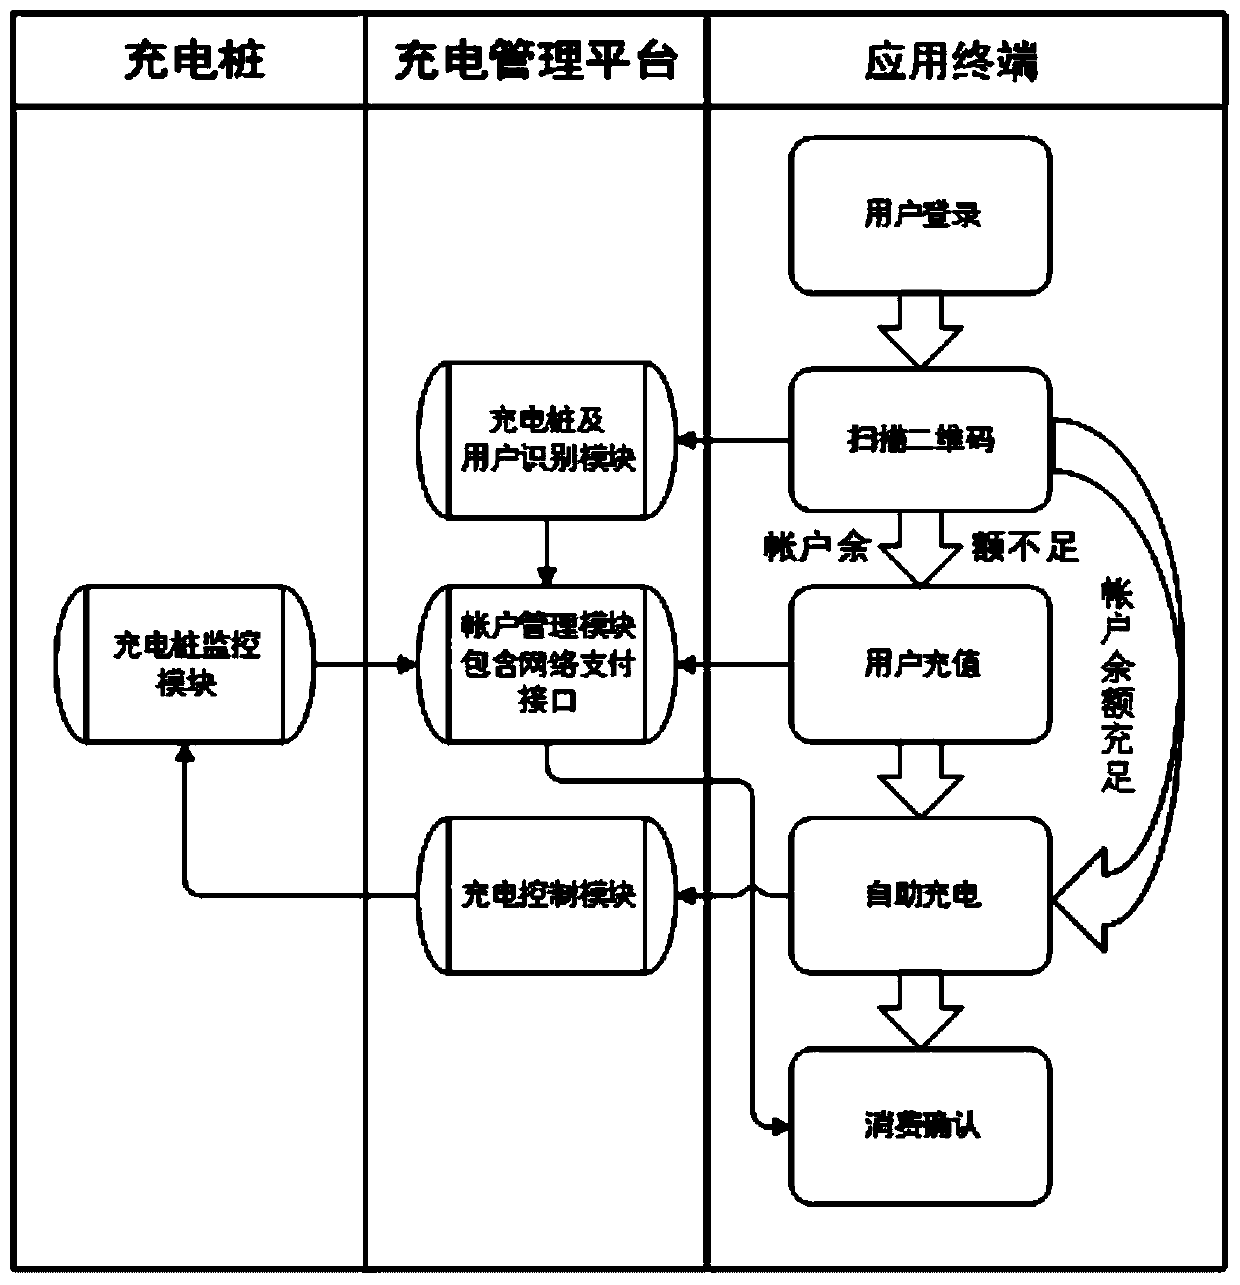 Electric car charging service billing system based on two-dimension codes and implementation method of electric car charging service billing system